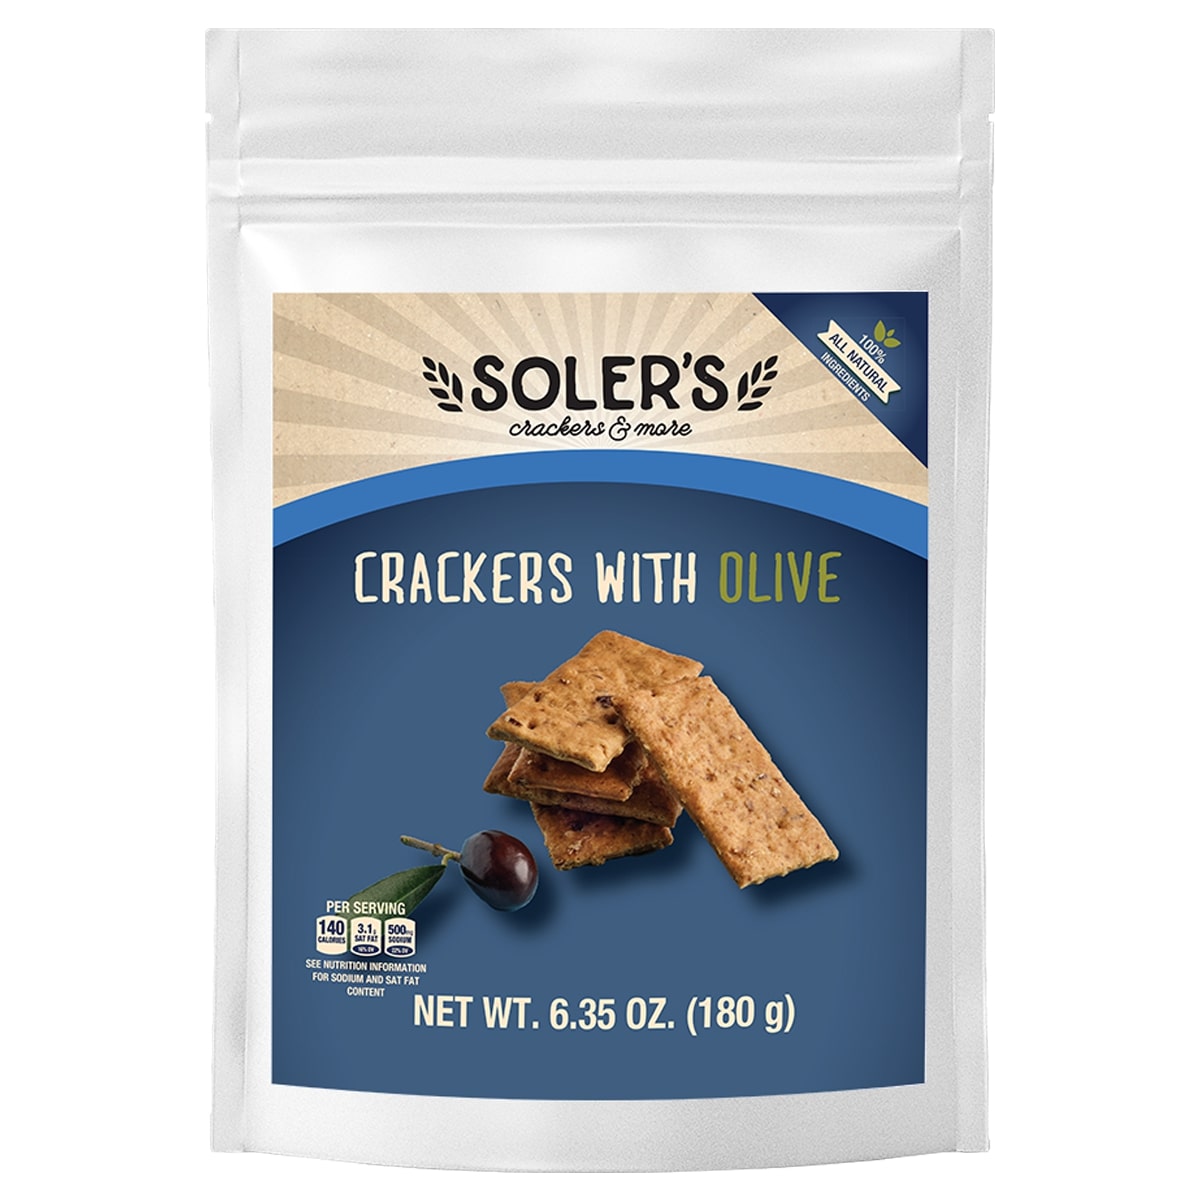 Crackers with olive